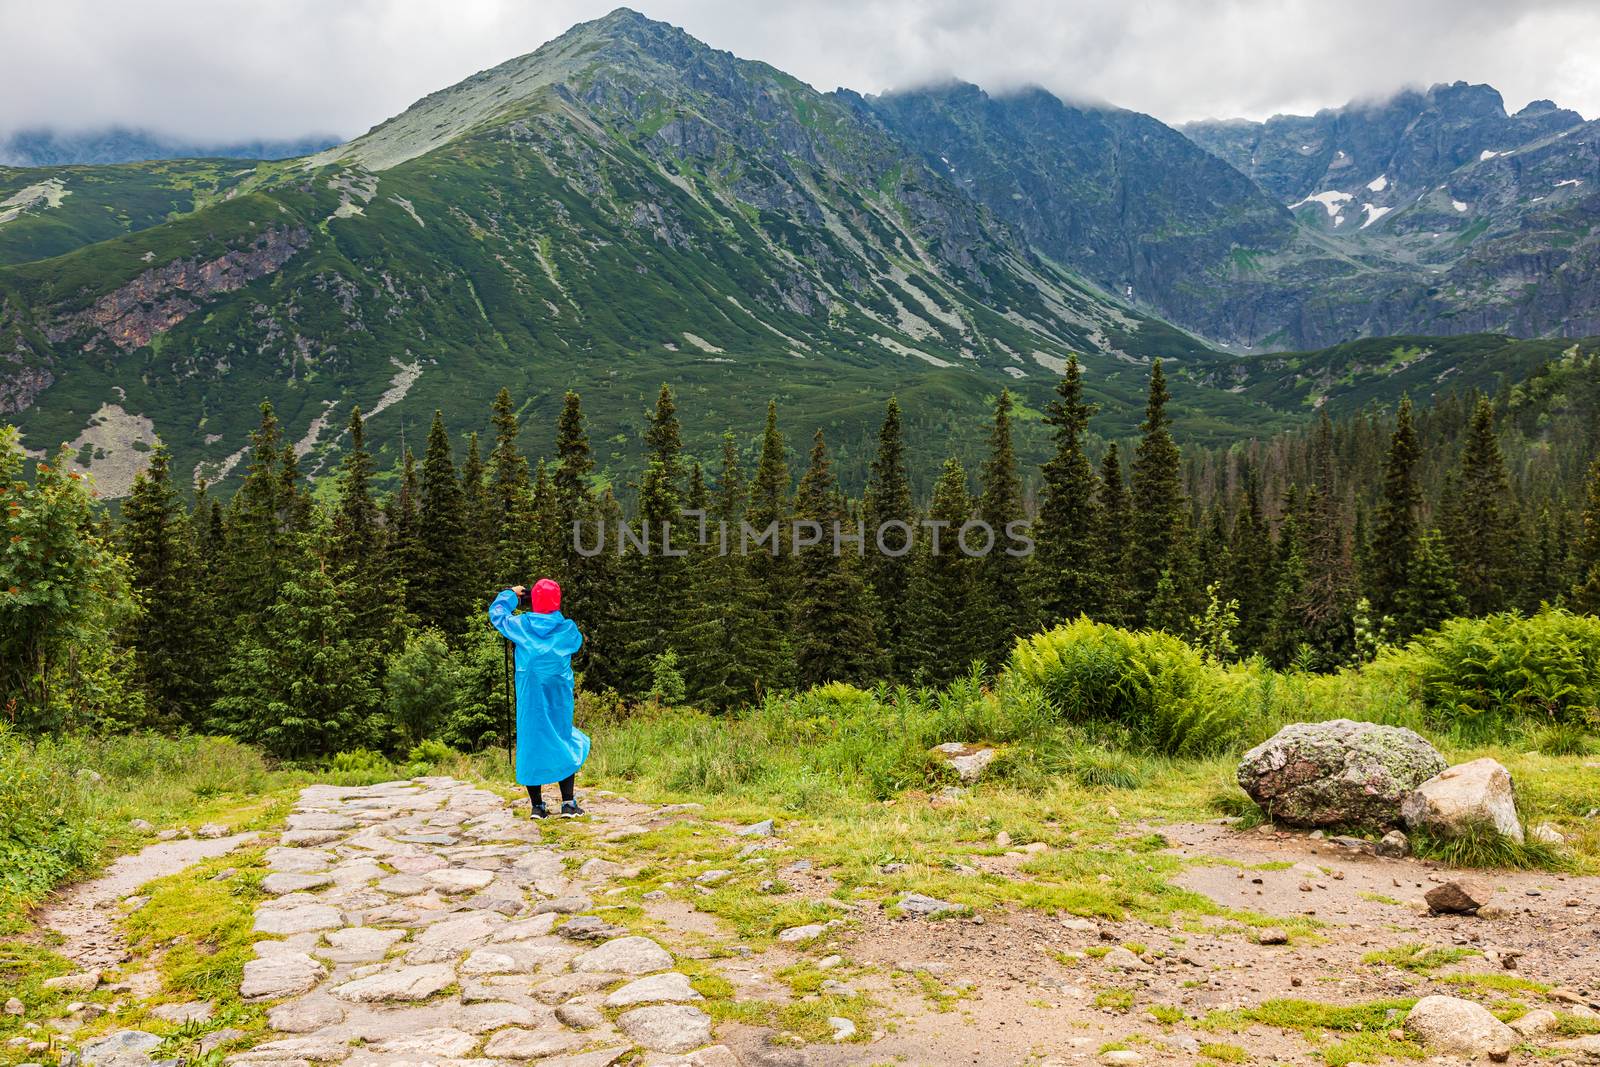 Hikker in a blue plastic raincoat taking picture in Tatra mountains, Poland in bad weather